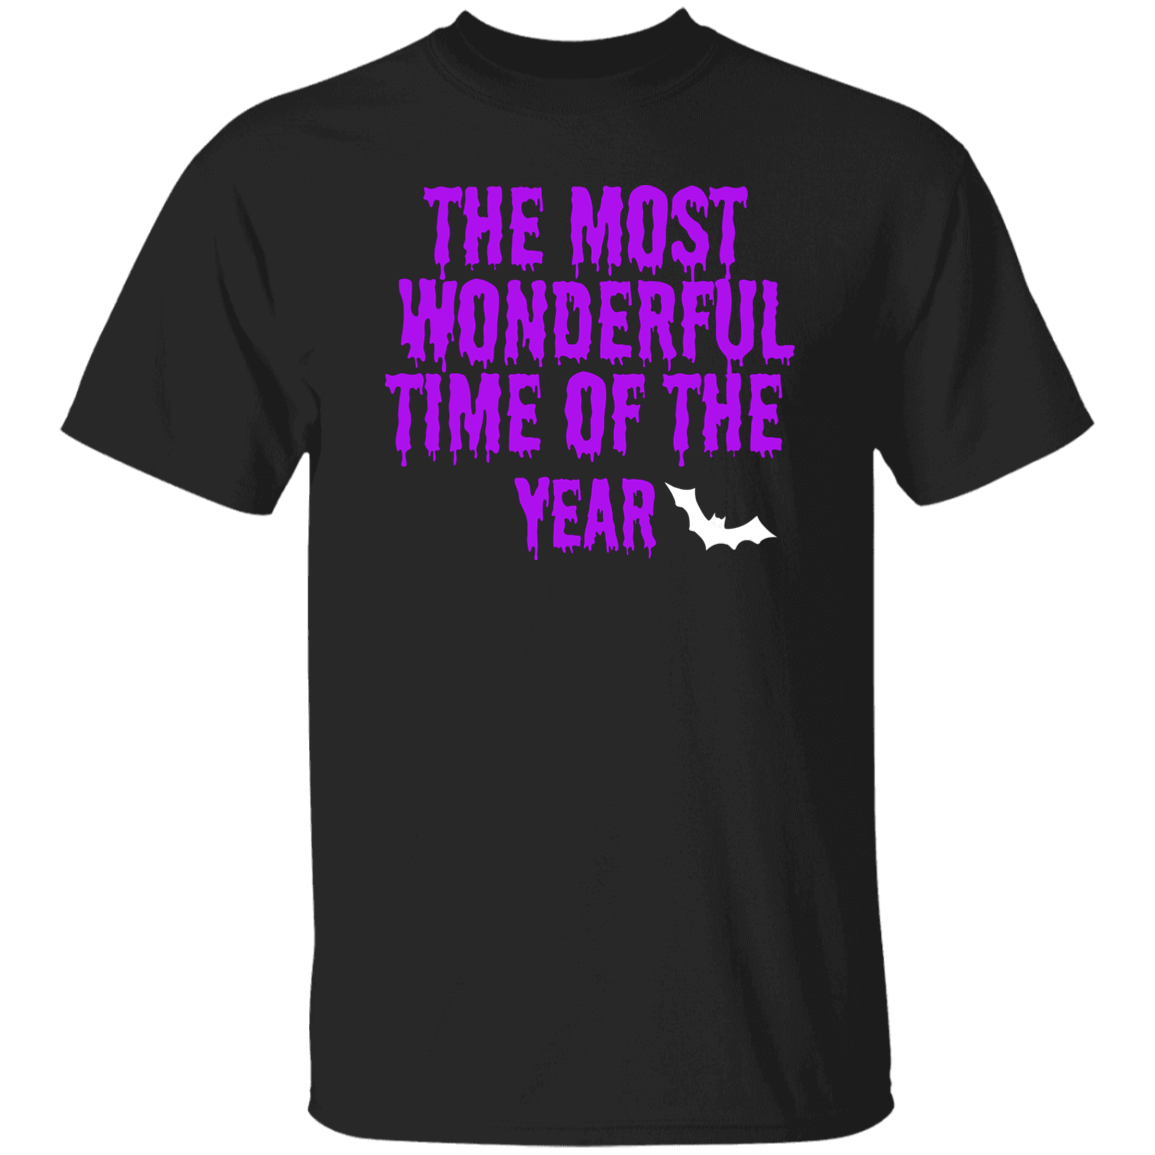 Most Wonderful Time of the Year T-Shirt